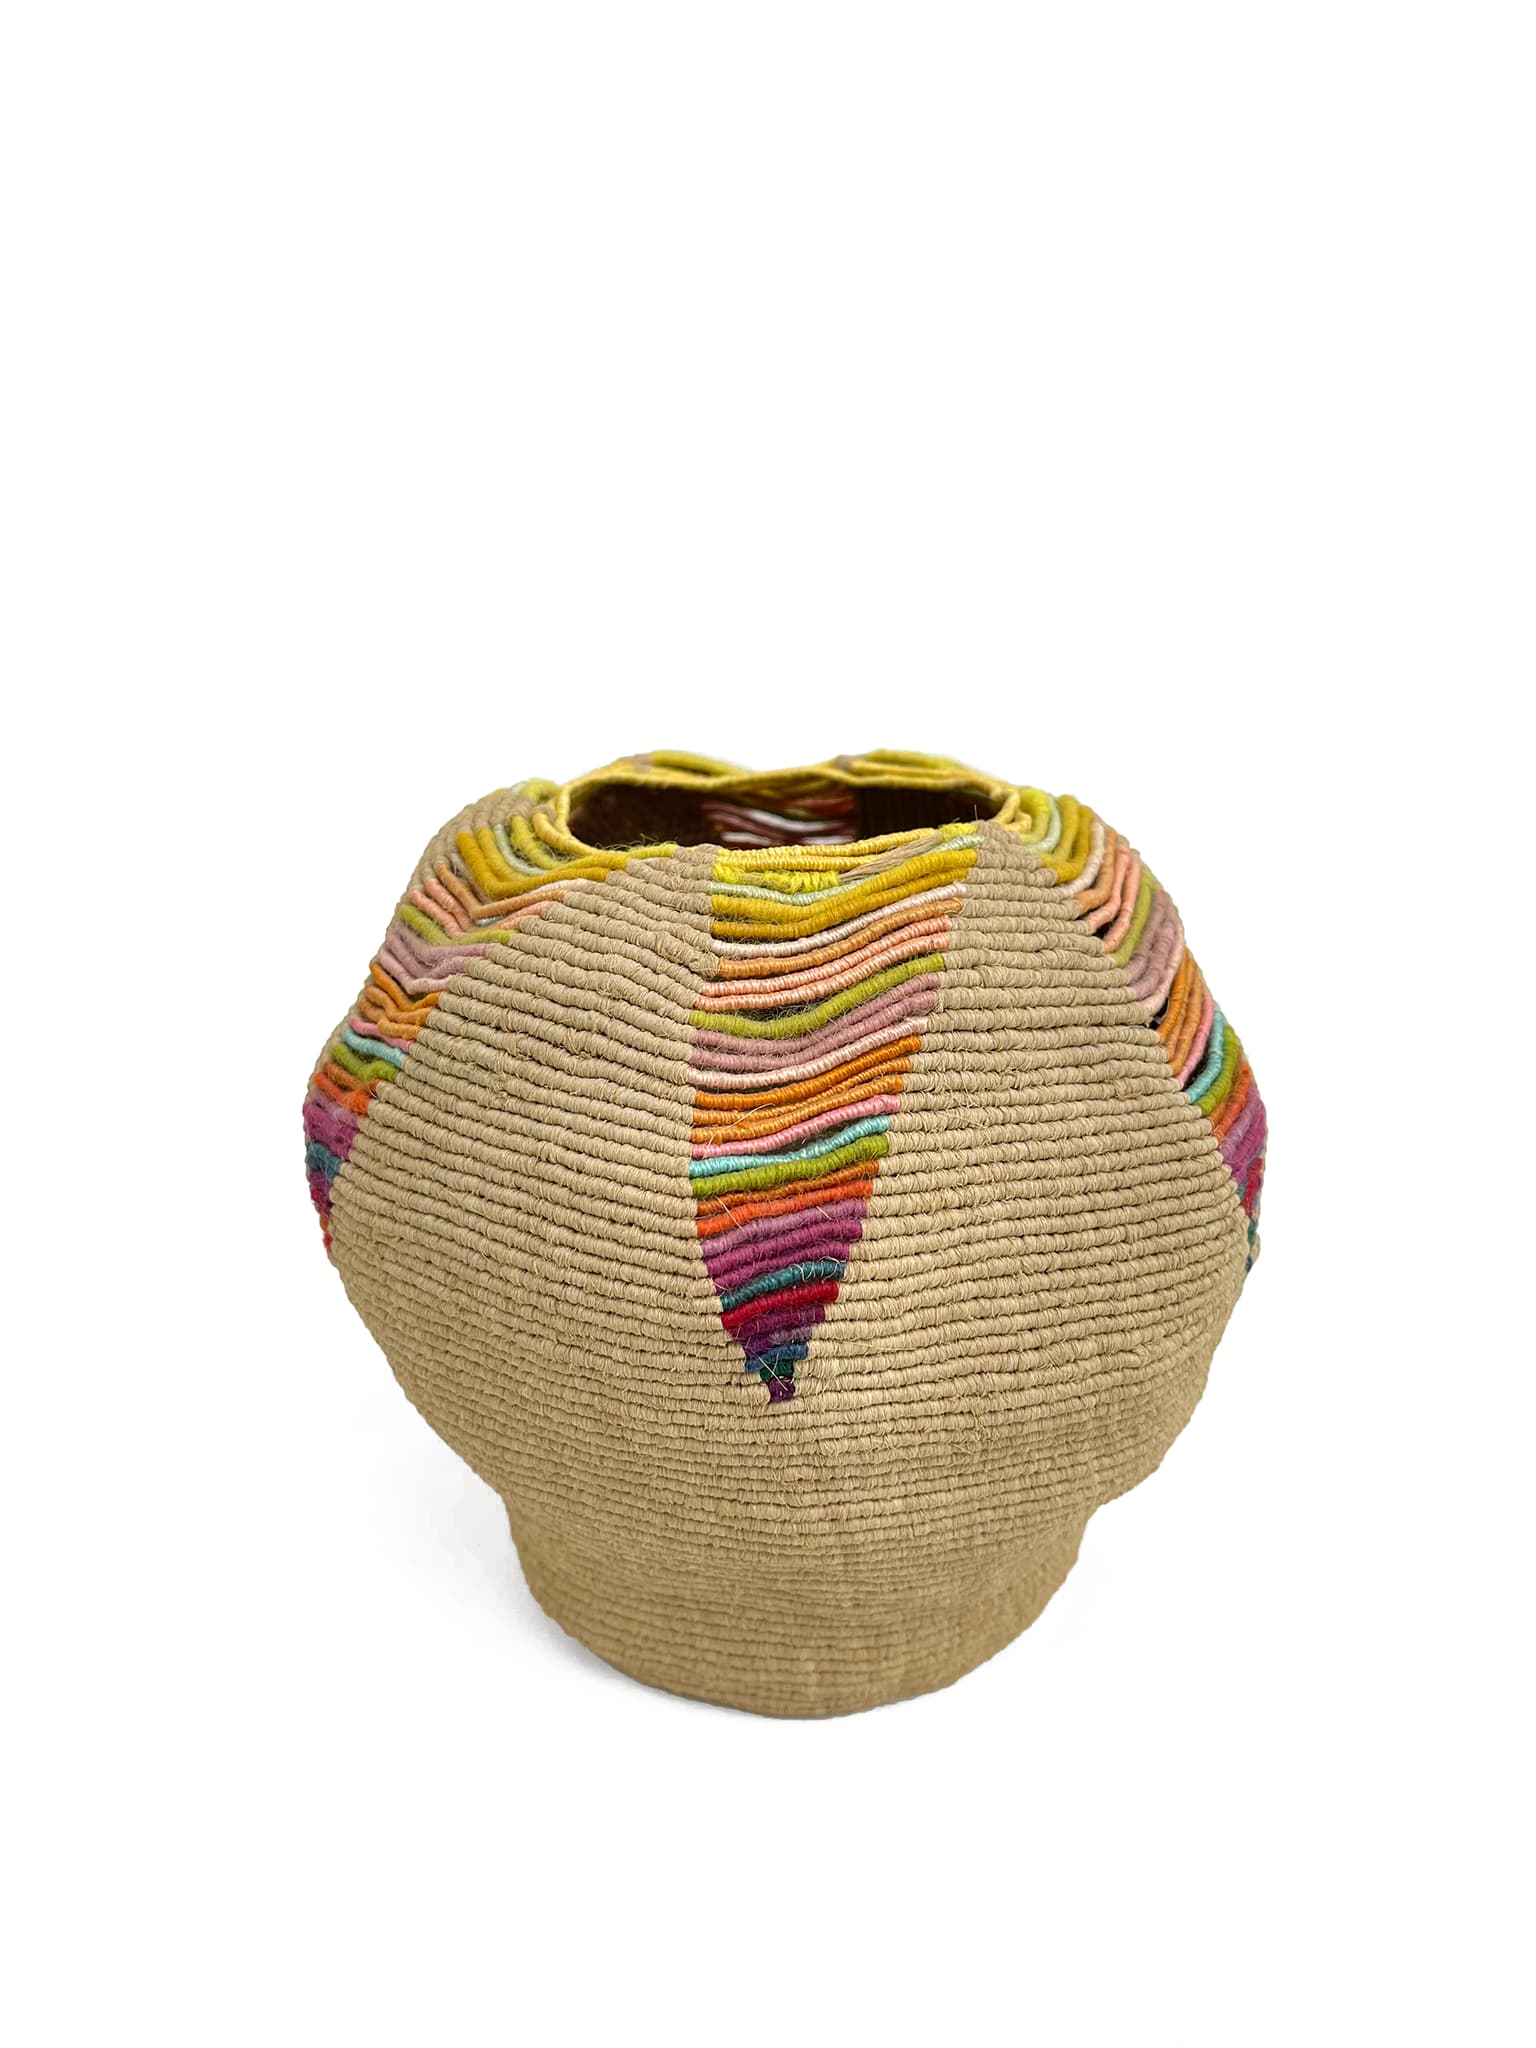 Ferne Jacobs, Rainbow Basket, 1971. Building the Essentials, Craft in America